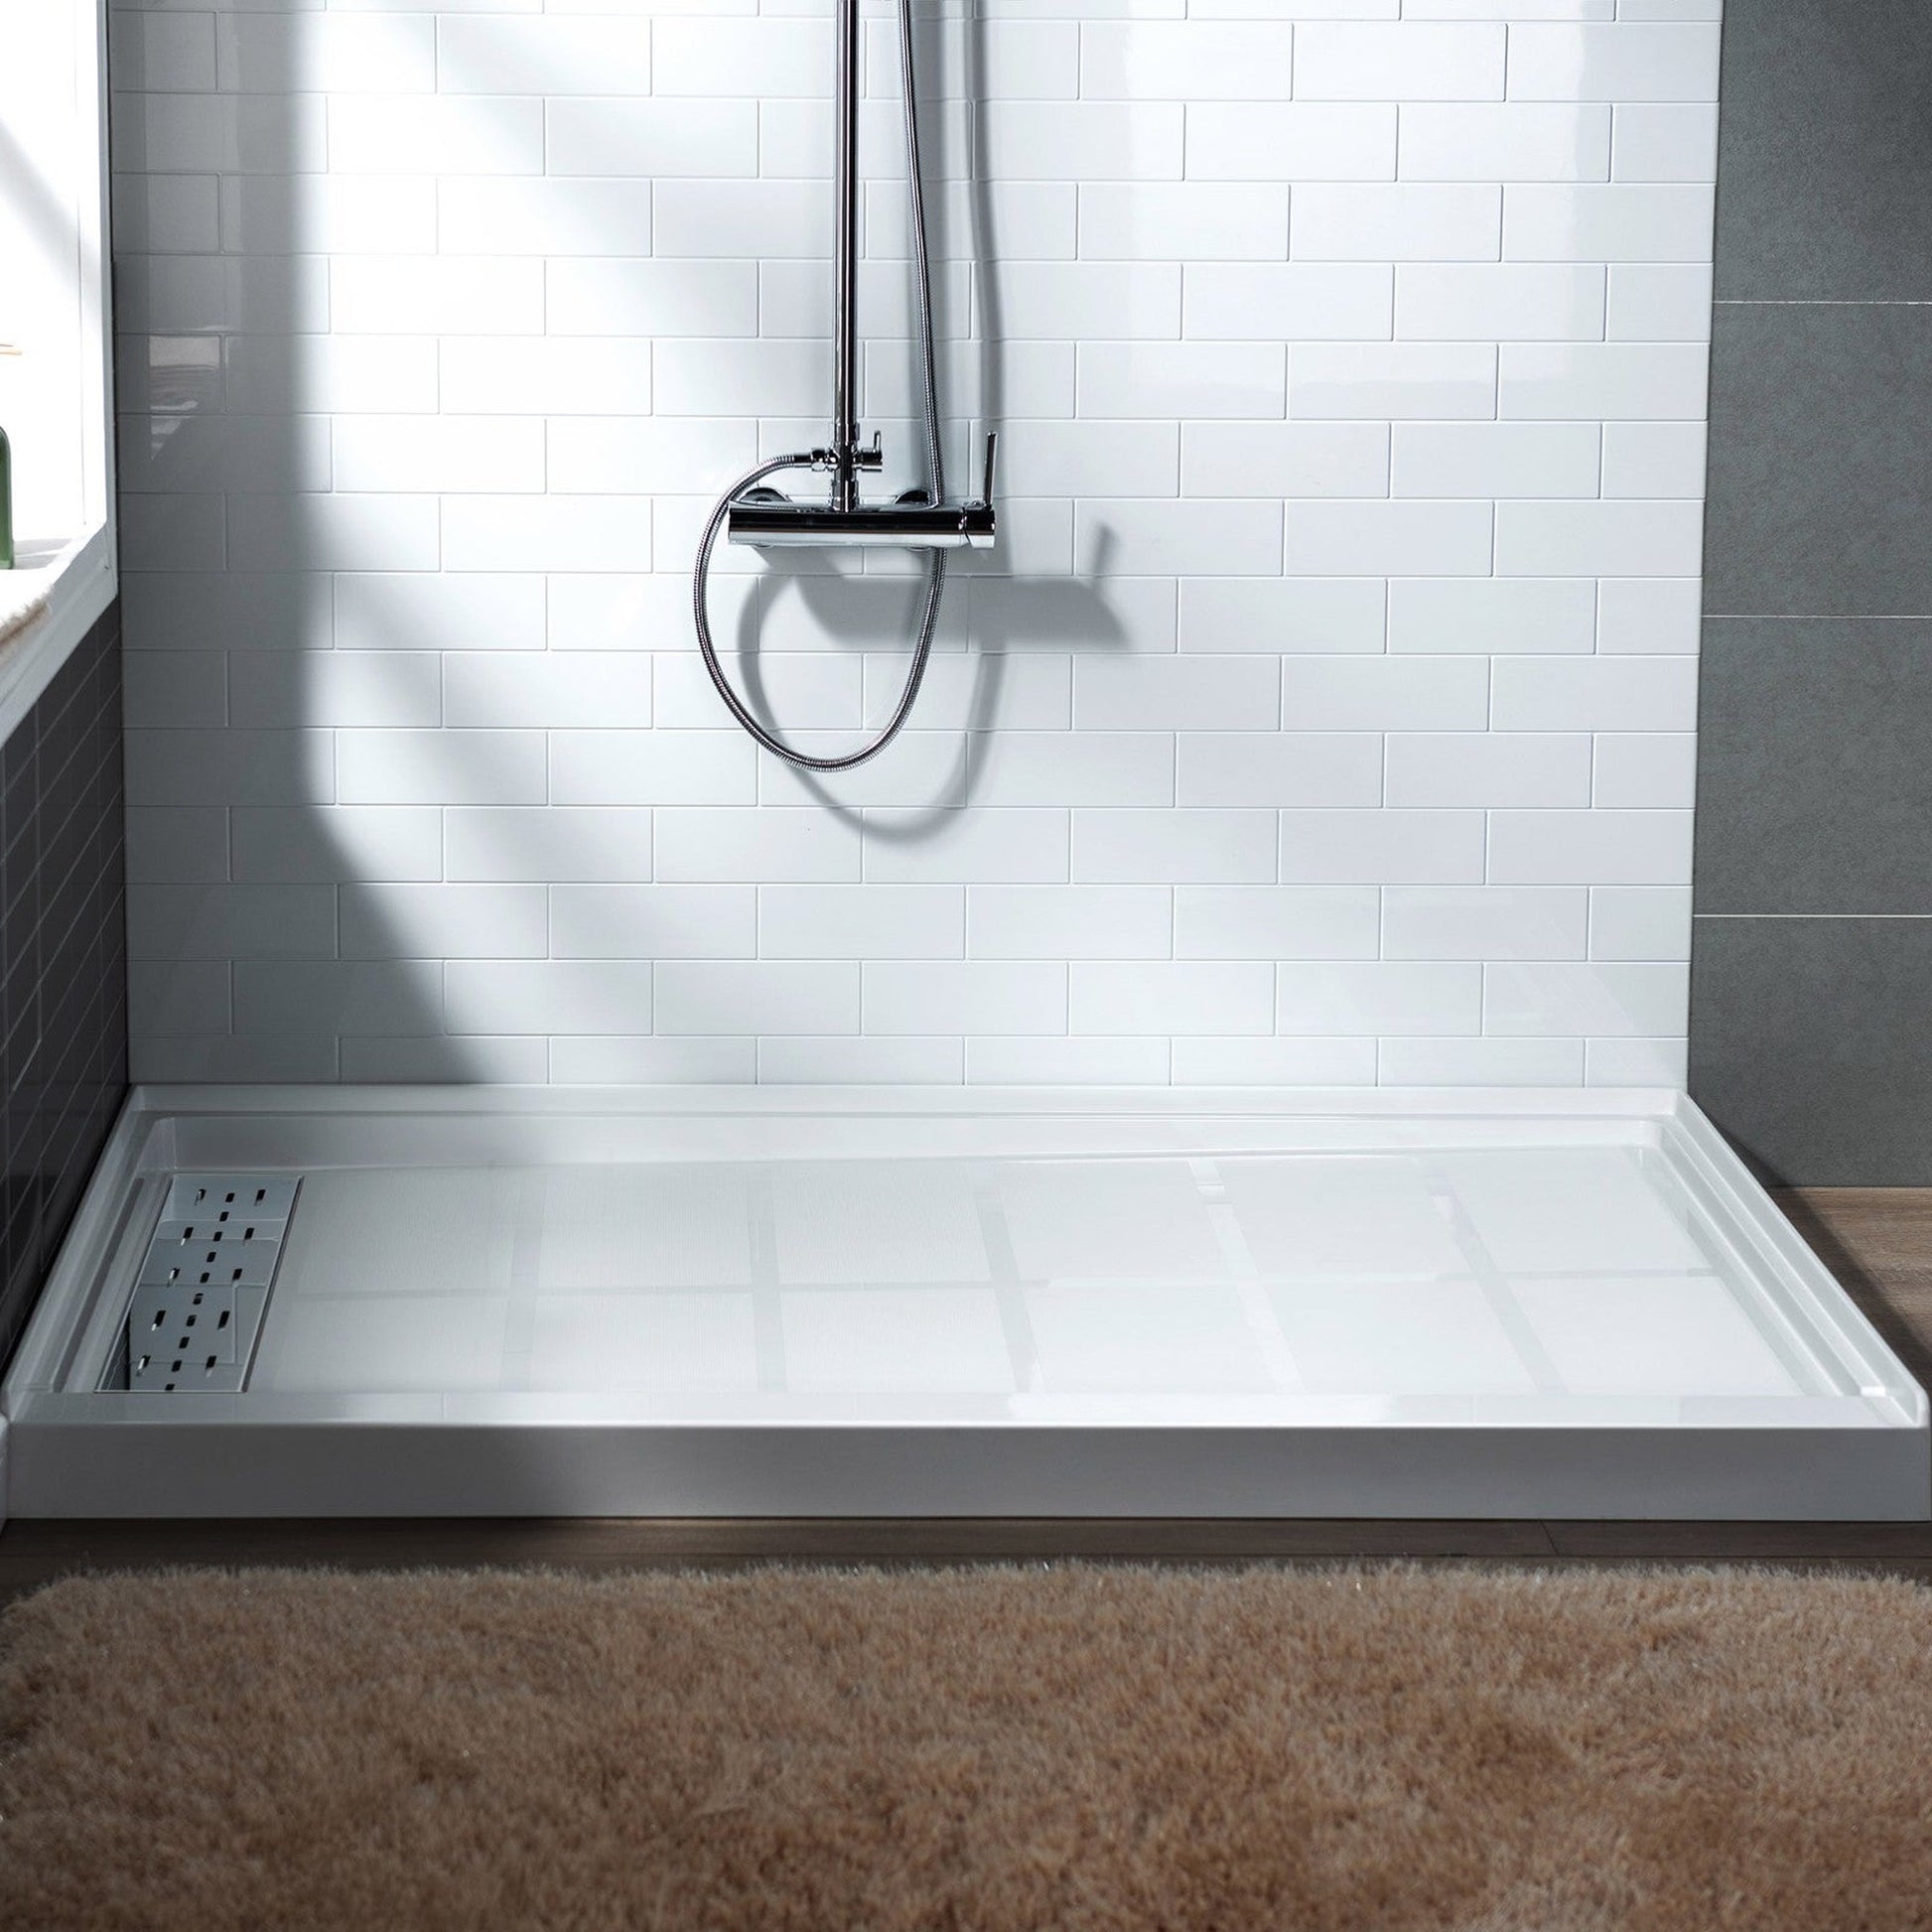 WoodBridge 60" x 30" White Solid Surface Shower Base Left Drain Location With Chrome Trench Drain Cover